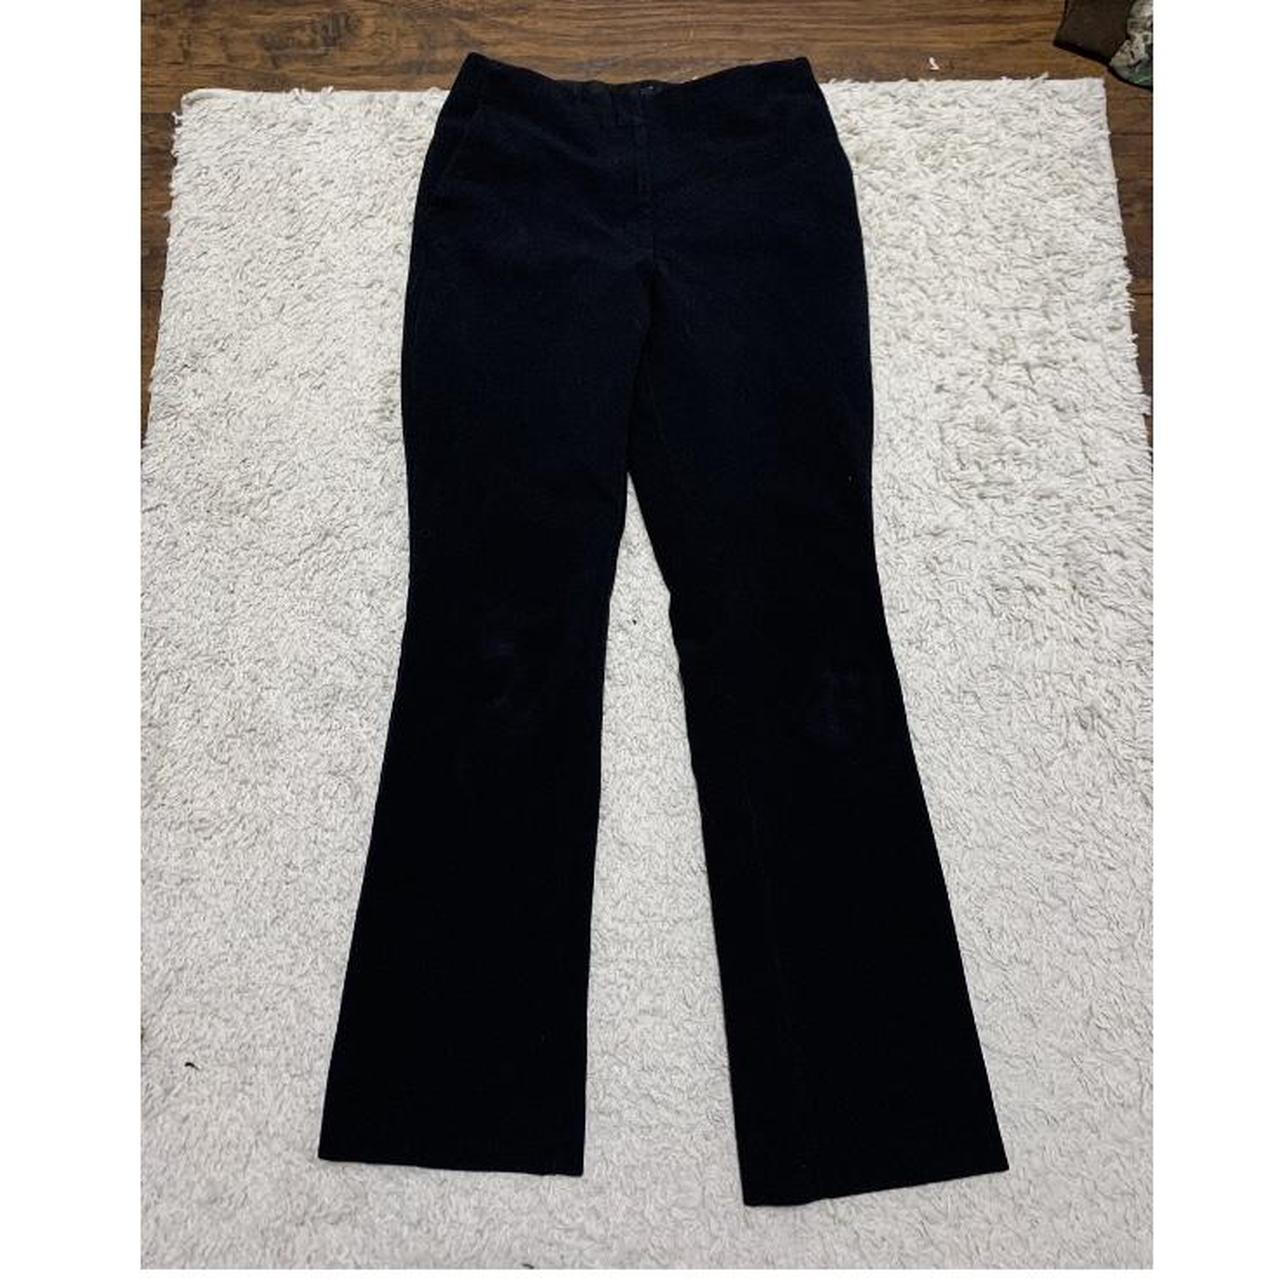 Express Womens Editor Dress Pants Size 0 for Sale in New York NY  OfferUp